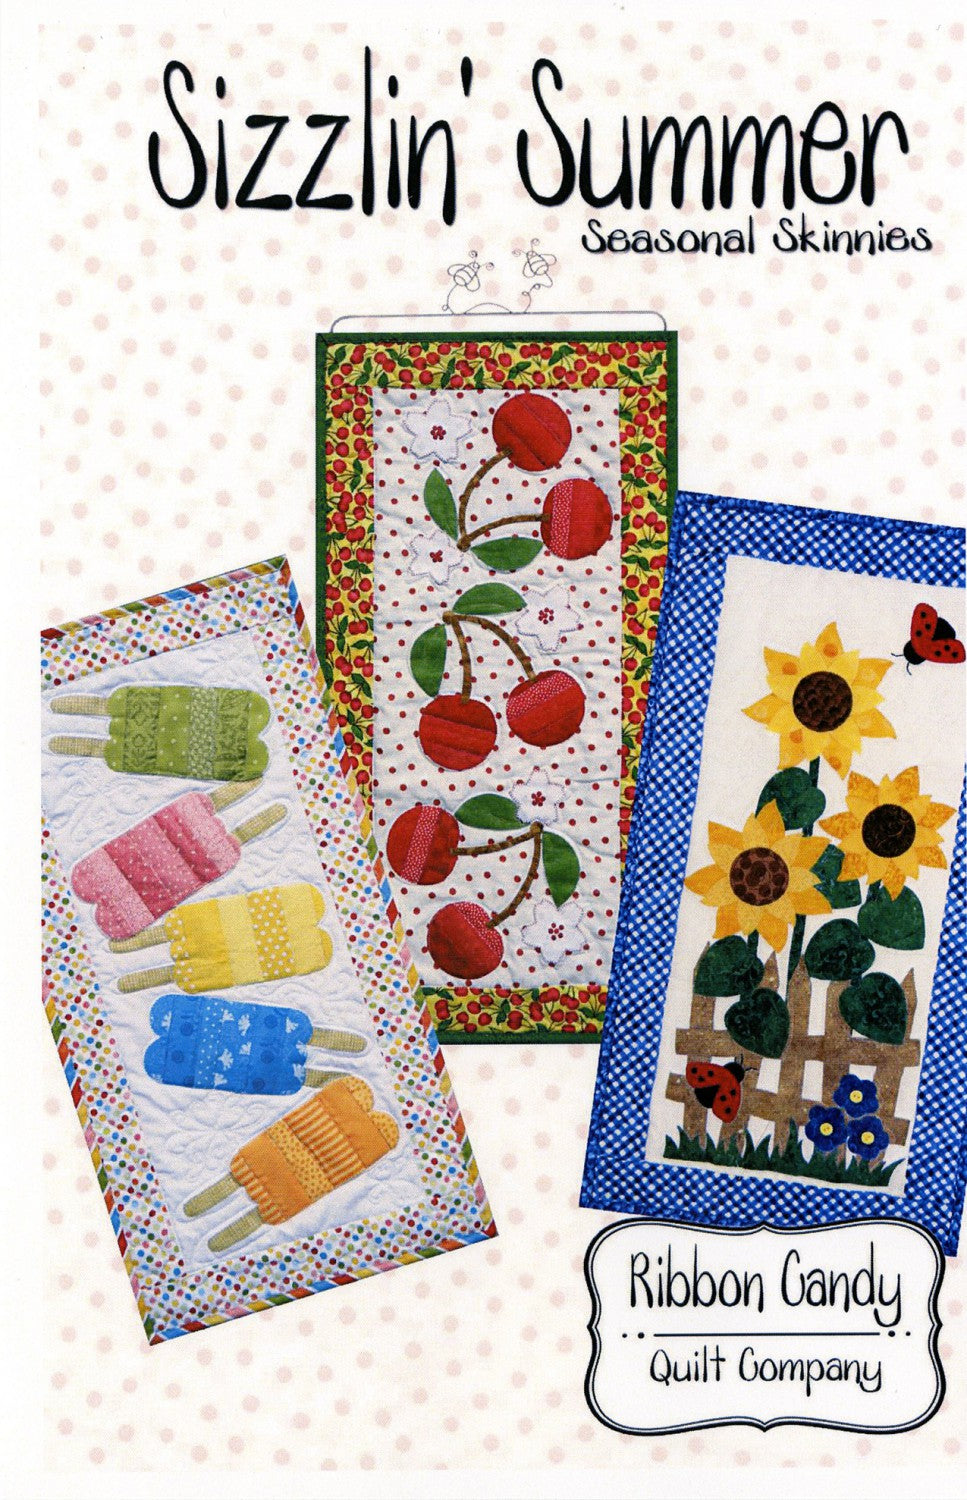 Sizzlin's Summer - Seasonal Skinnies by Ribbon Candy Quilt Company